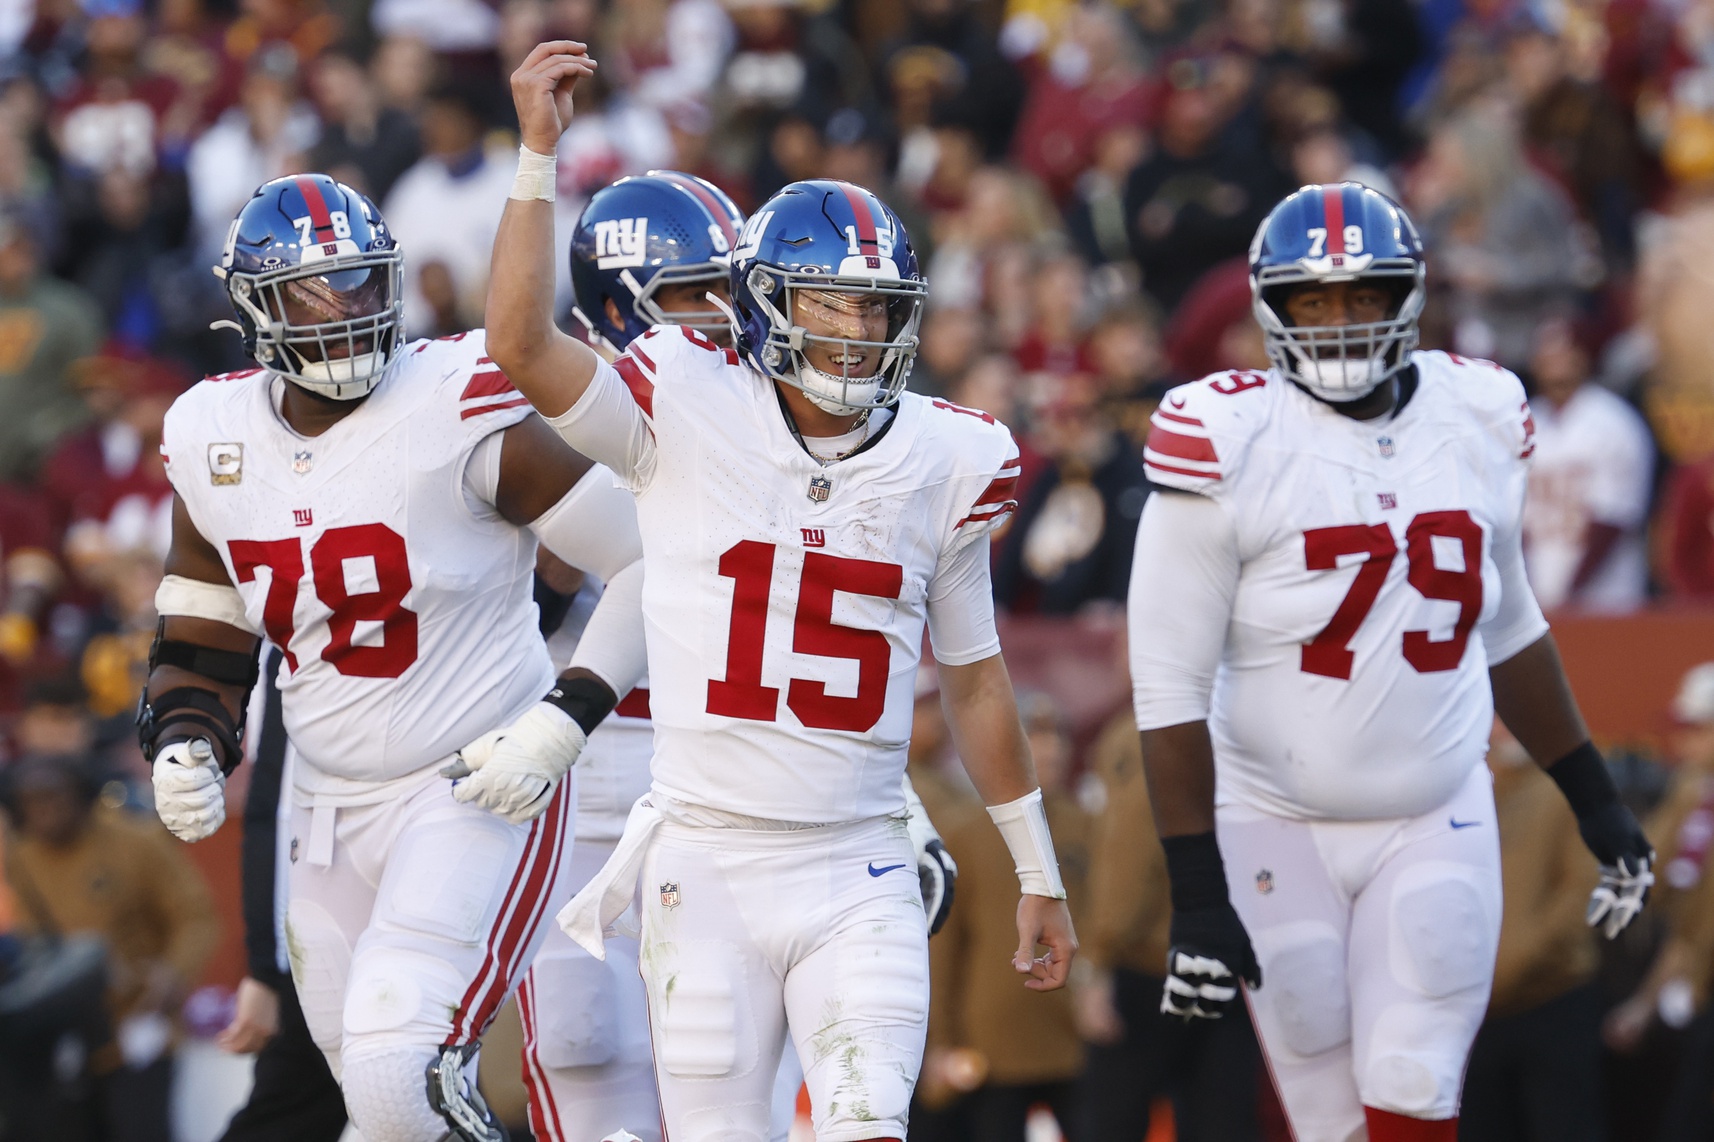 New York Giants QB Tommy DeVito (15) celebrates with teammates after throwing a touchdown pass against the Washington Commanders.